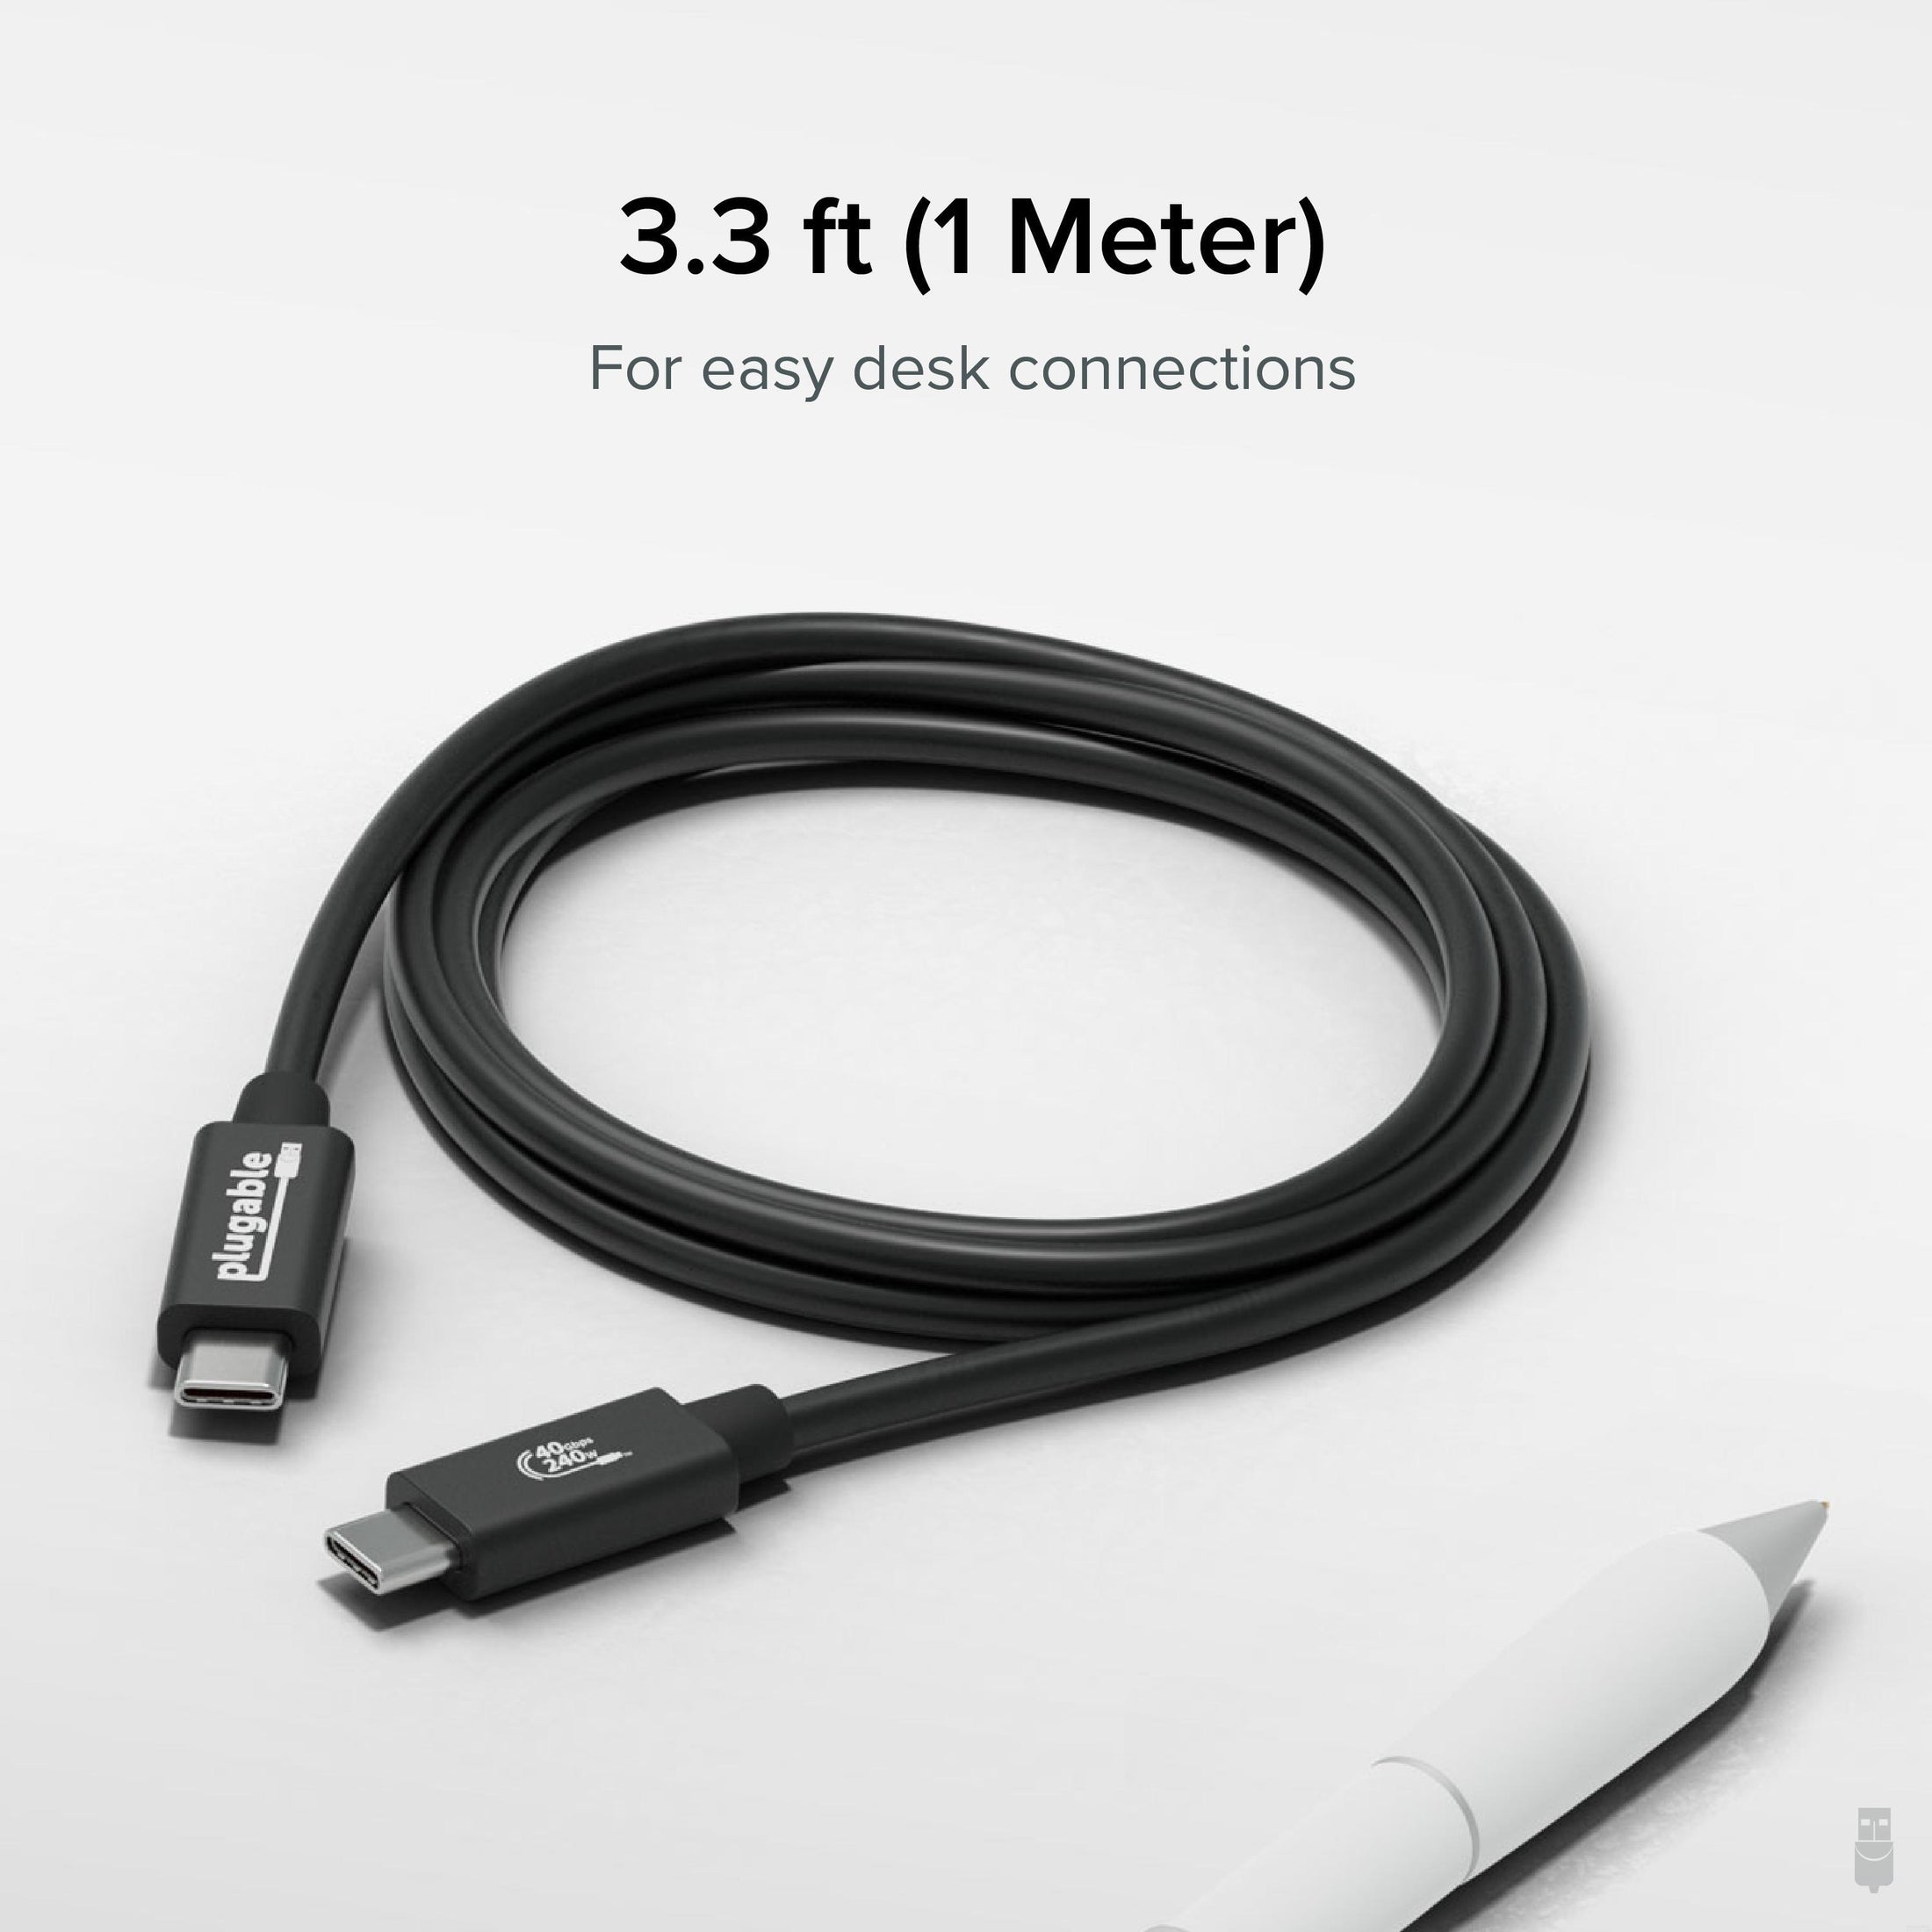 USB C to USB C Cable 4Ft,Thunderbolt 4/3(40Gbps/100W/5K)USB4 Cable Fast  Charging Cable Cord PD 20V USB Type C Charger Data Transfer Cord Compatible  with MacBook,iPad Pro,Samsung Galaxy,Docking Station 